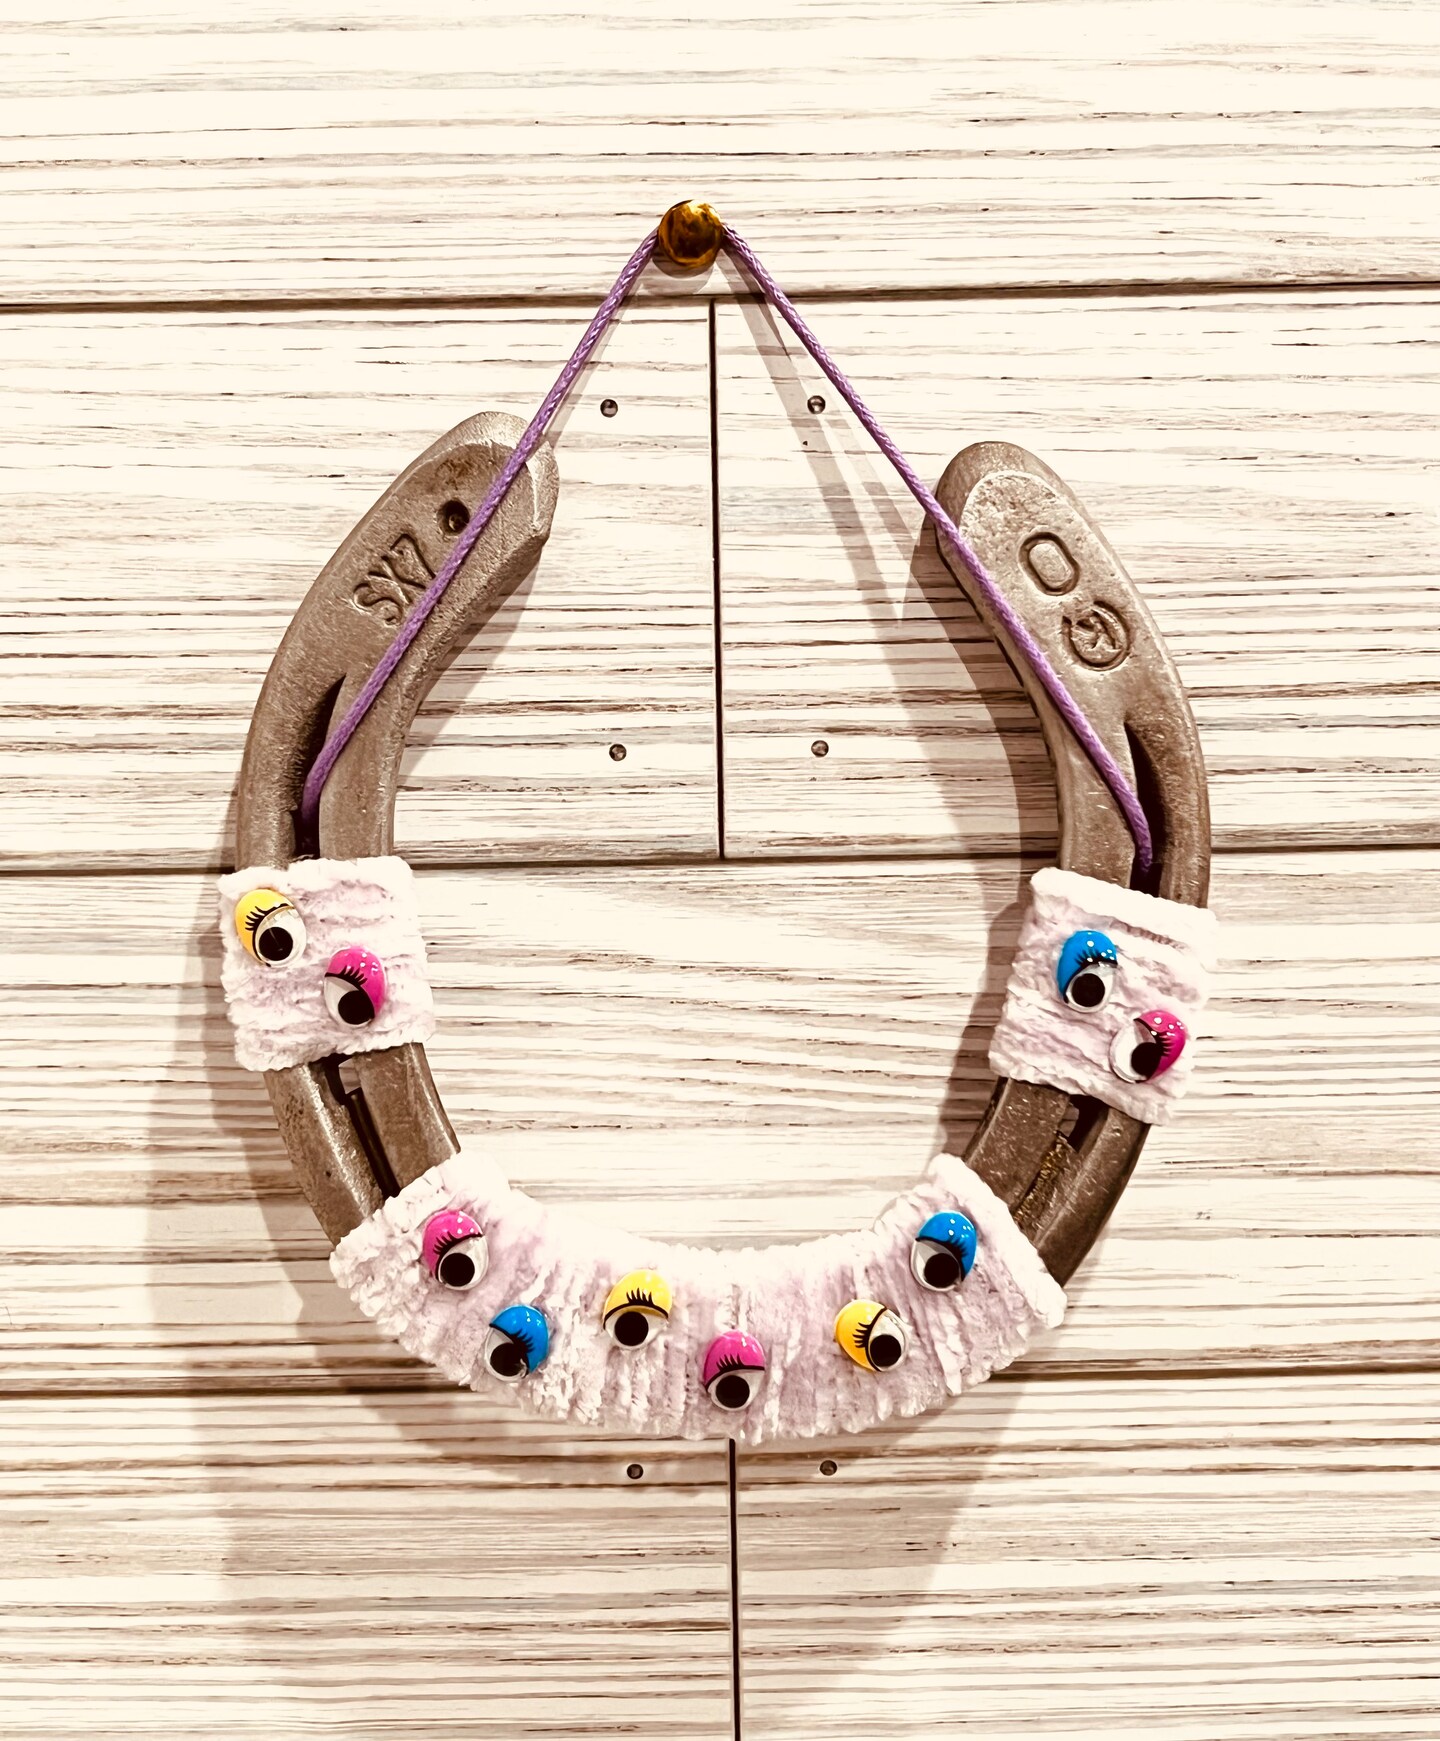  Horse Lover Gift - Rustic Hanging Horseshoe Decor : Handmade  Products